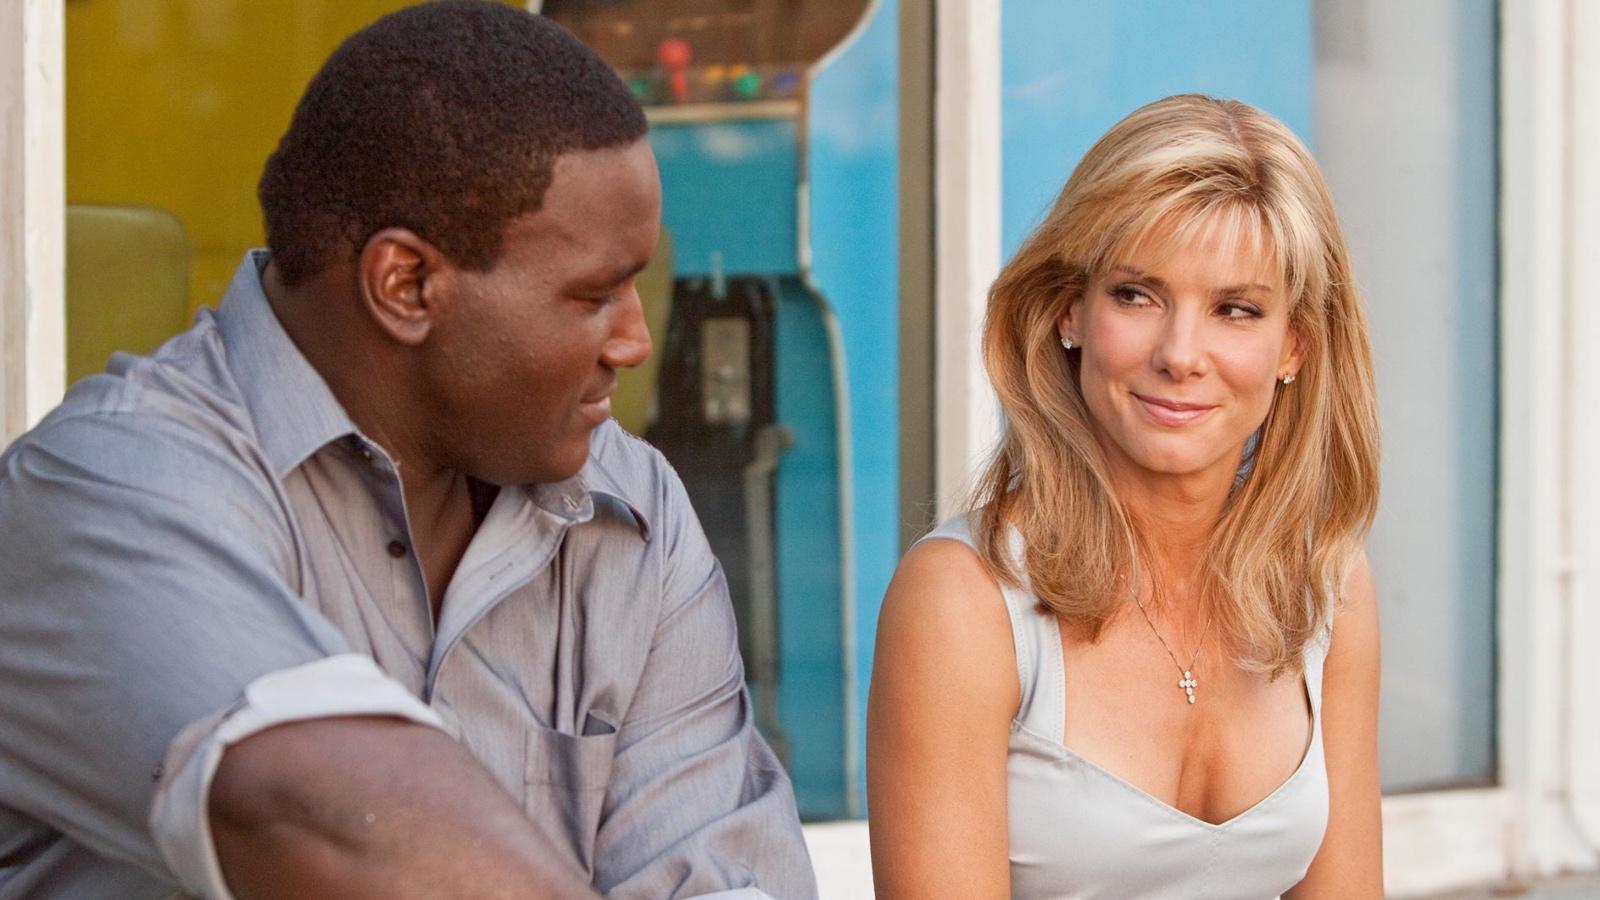 Sandra Bullock starred as Leigh Anne Tuohy in The Blind Side